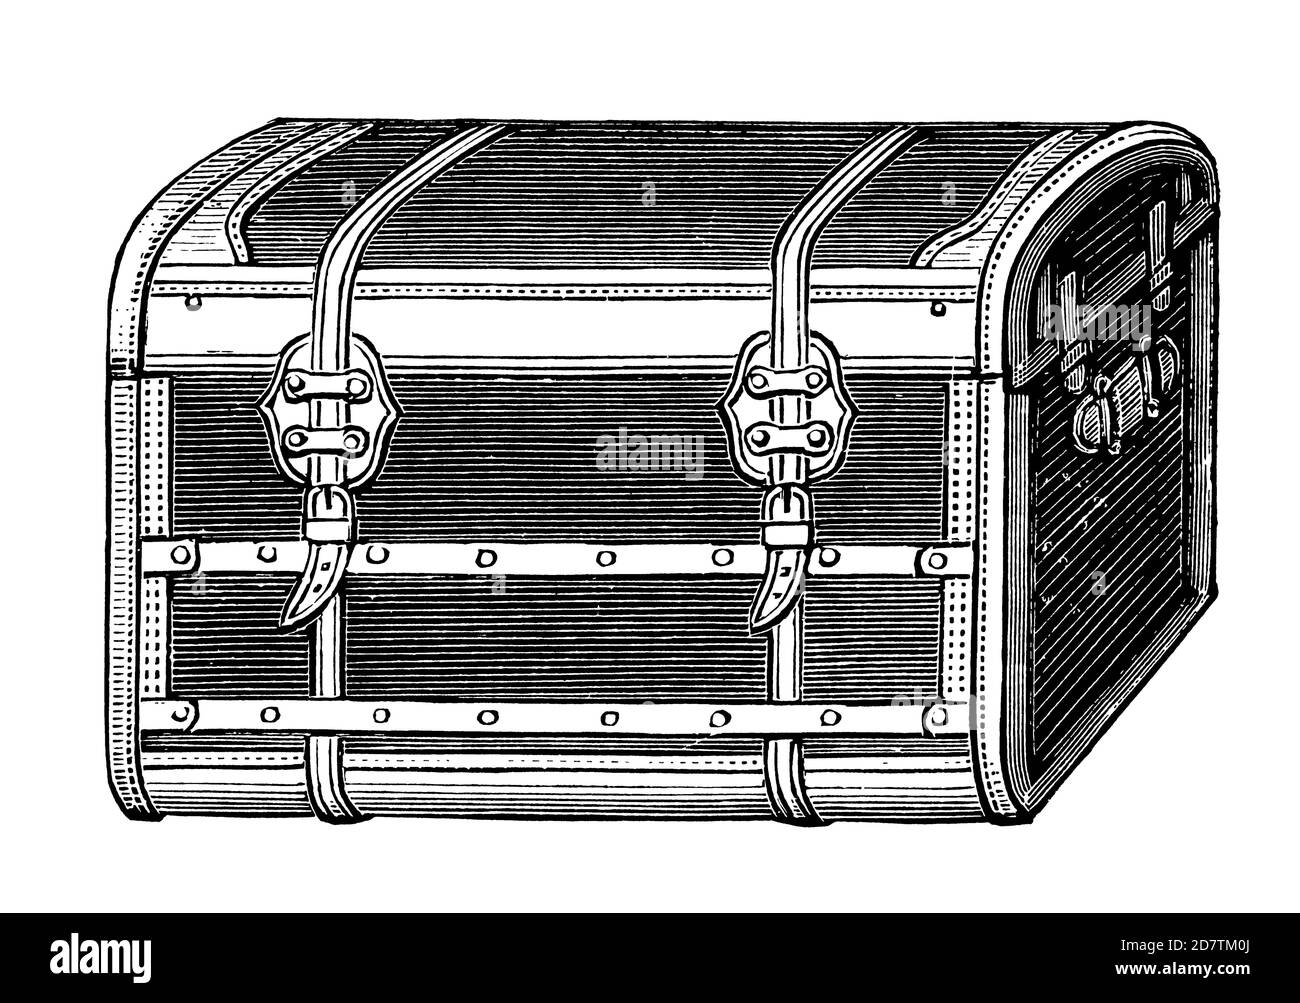 Vintage Travel Suitcase - Original Antique 19th Century Tourism Advertising Design Black and White Illustrations of Travel Accessories and Bags Stock Photo